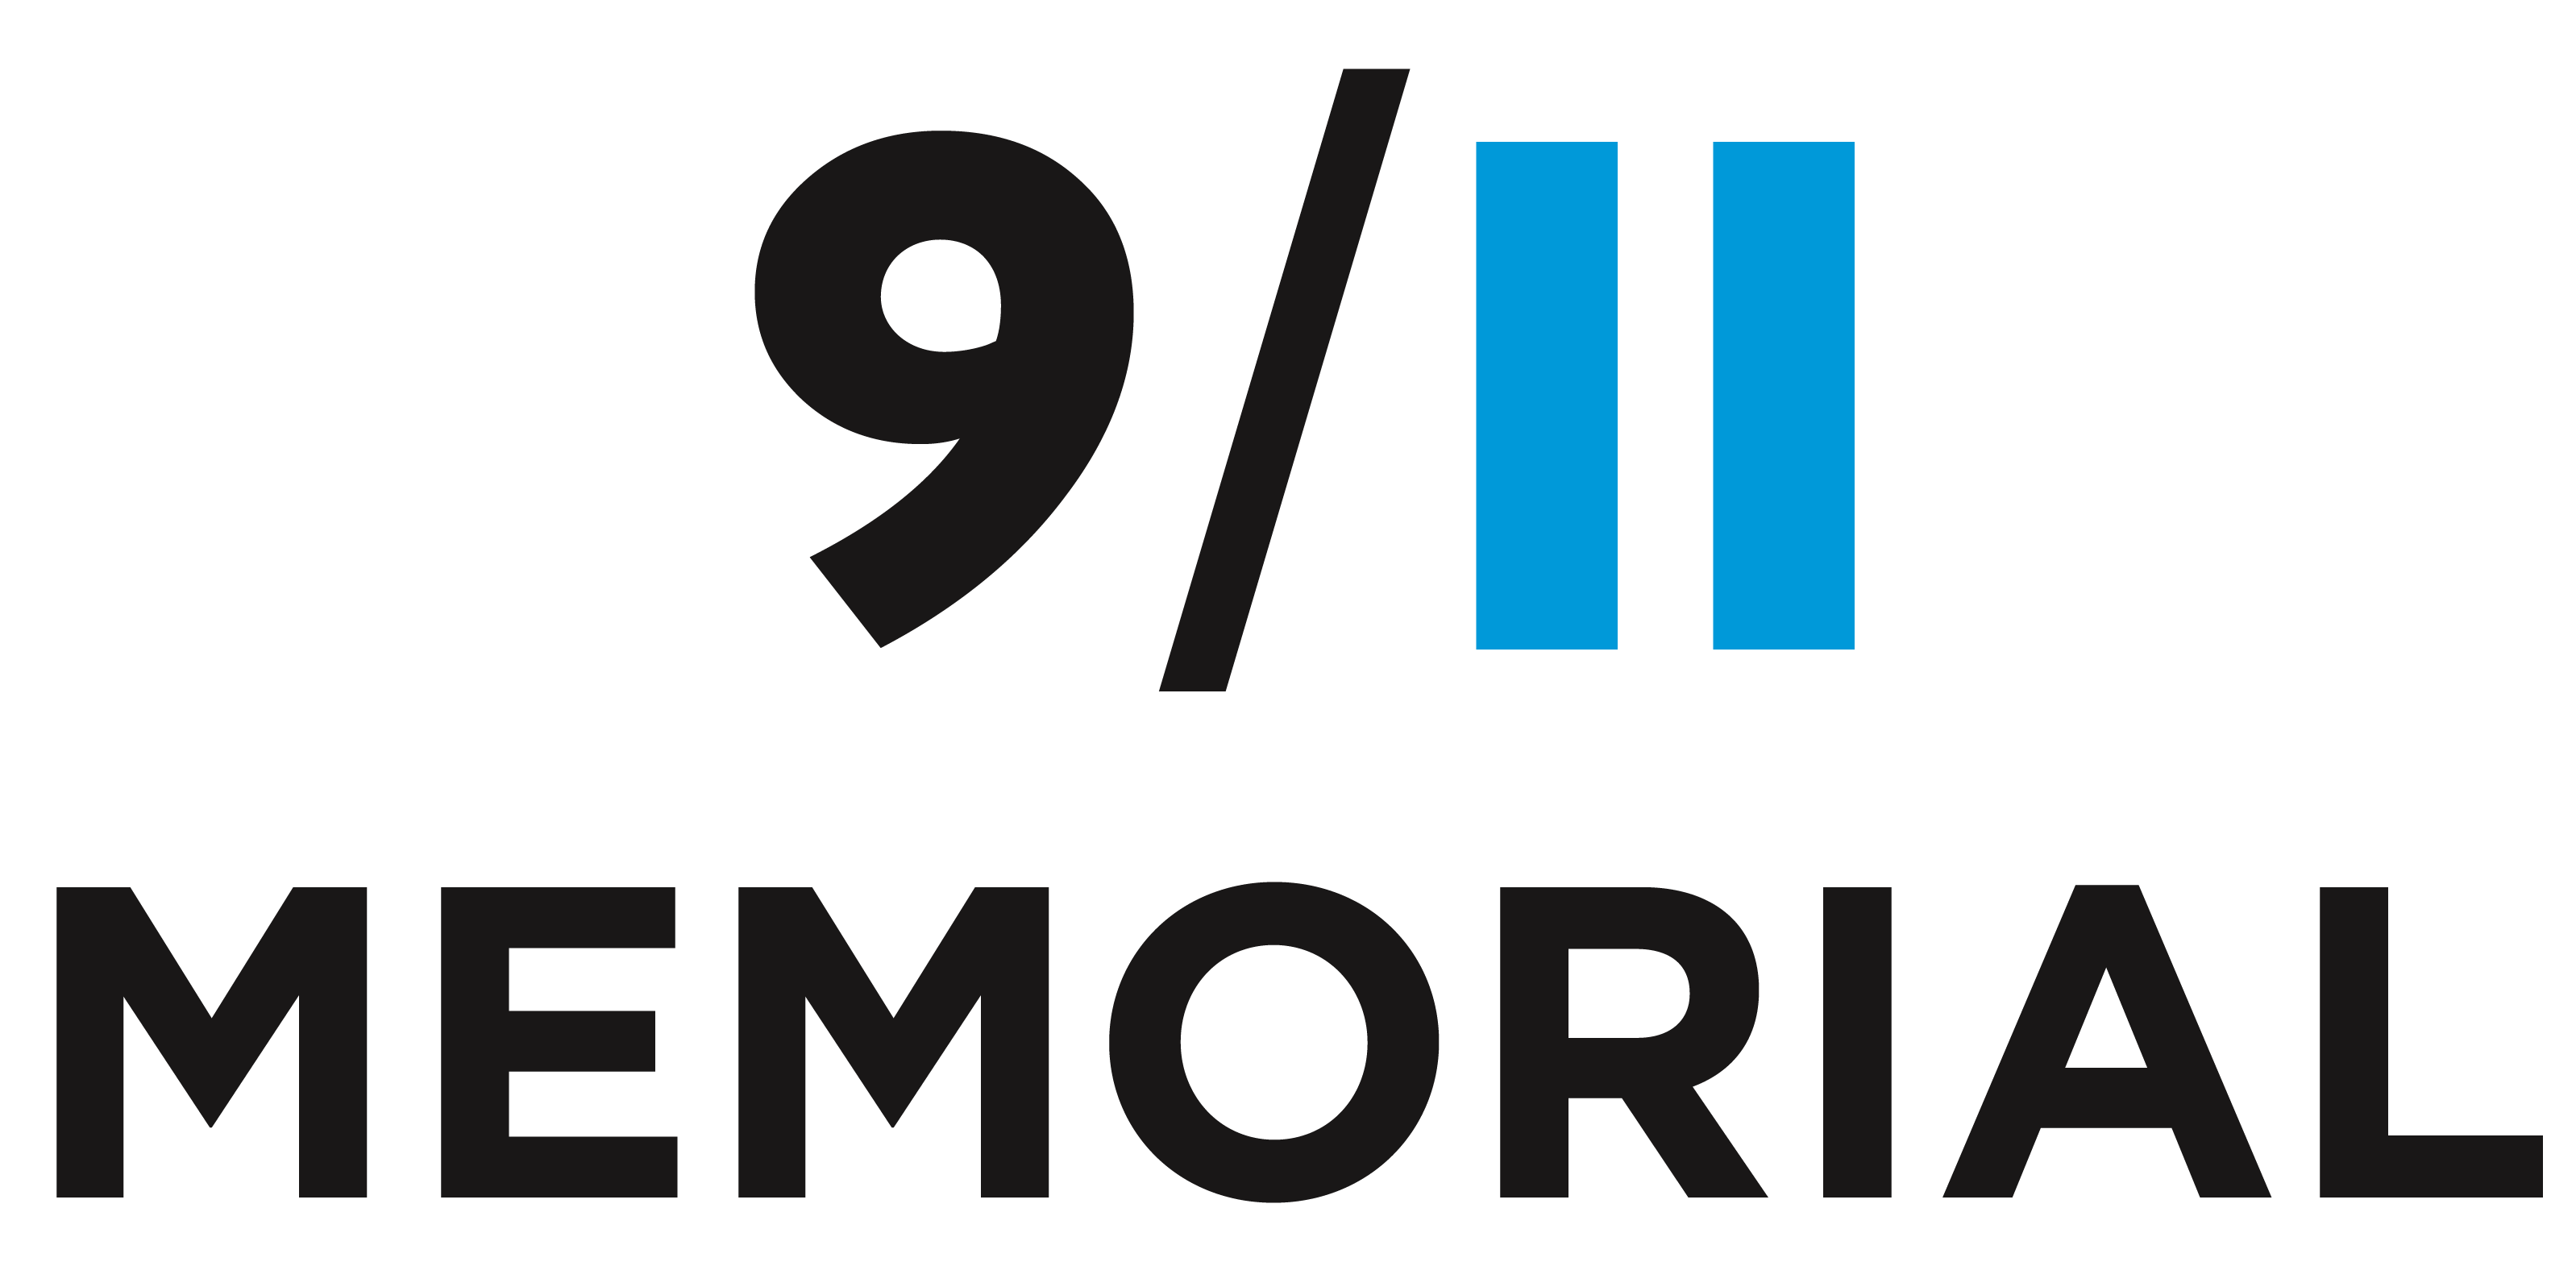 President Dr. Joseph L. Chillo will host a tailgating rally prior to the game where he will honor over 100 Thomas More University graduates and community members that serve as first responders, law enforcement, armed services members, and veterans. Included in the president’s remarks to the attendees will be a moment of silence in memory of the terrorist attacks that took place on September 11, 2001. #ThomasMore #ThomasMore100 #911